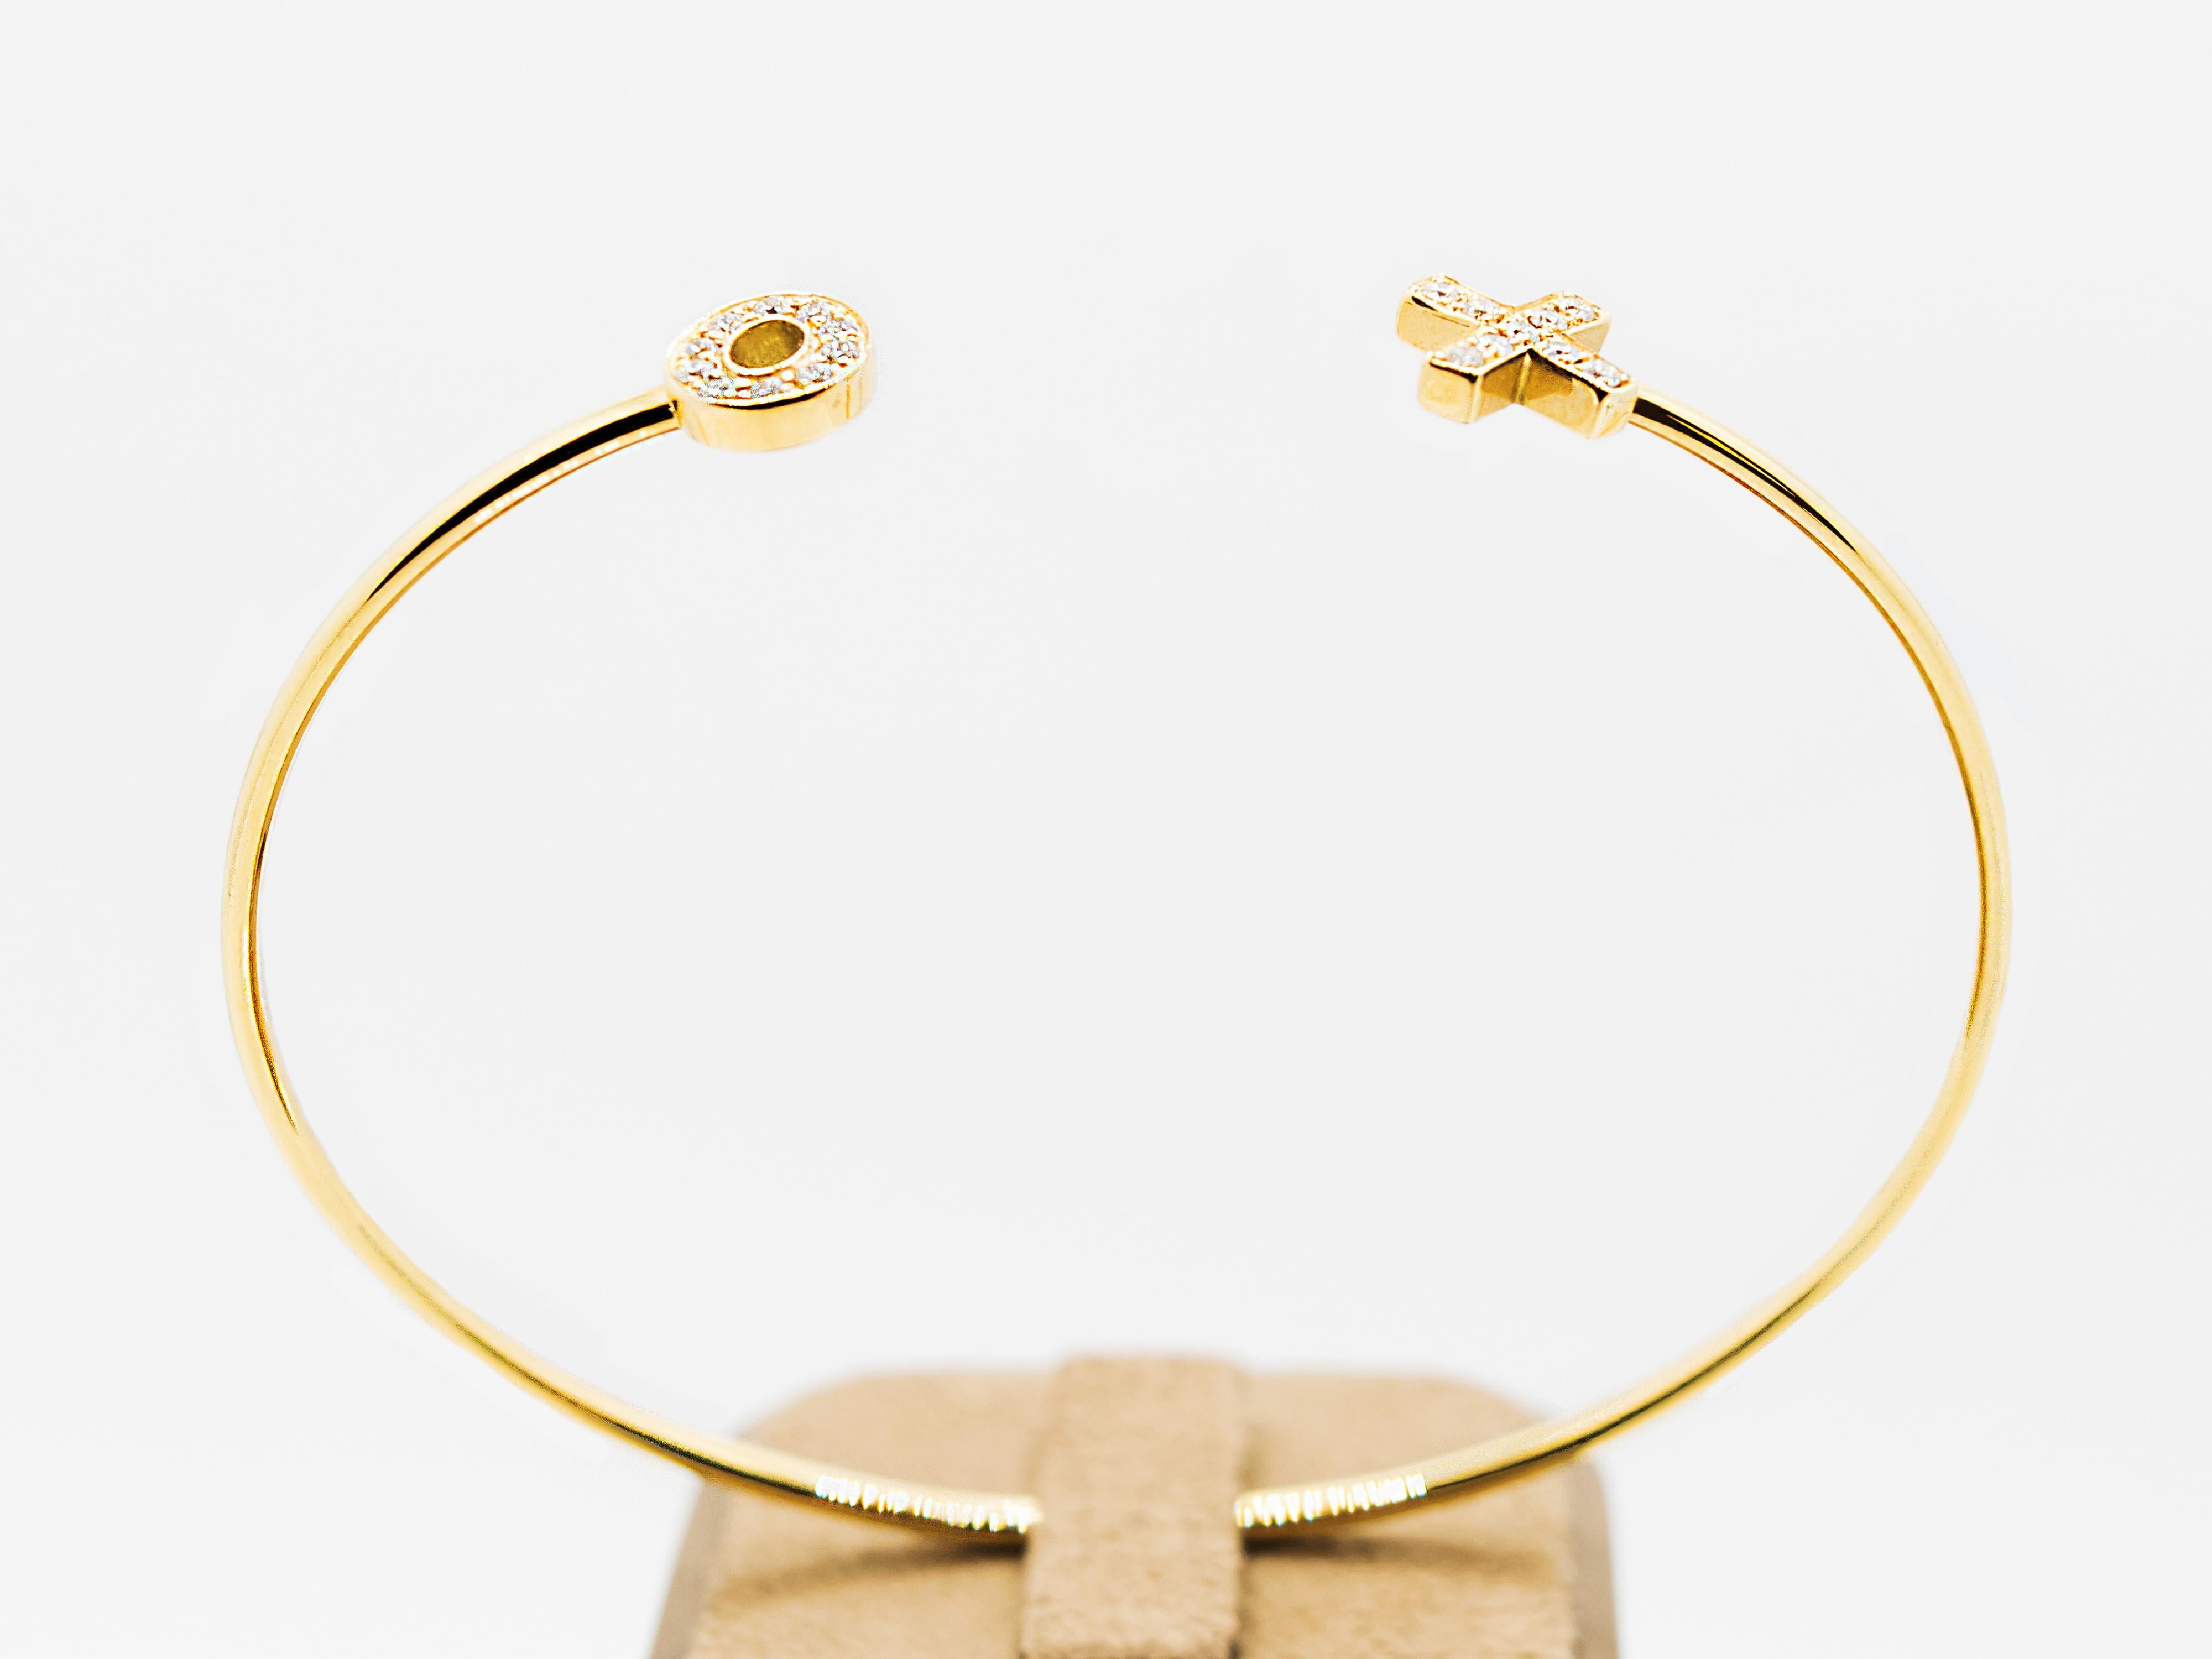 A very sophisticated bangle bracelet made in 18 Kt yellow gold.
The wire of which it is composed has a 2mm diameter that makes it strong and extremely safe to wear.
The X O design is embellished by ct 0.14 of white diamonds.
Total weigh is gr